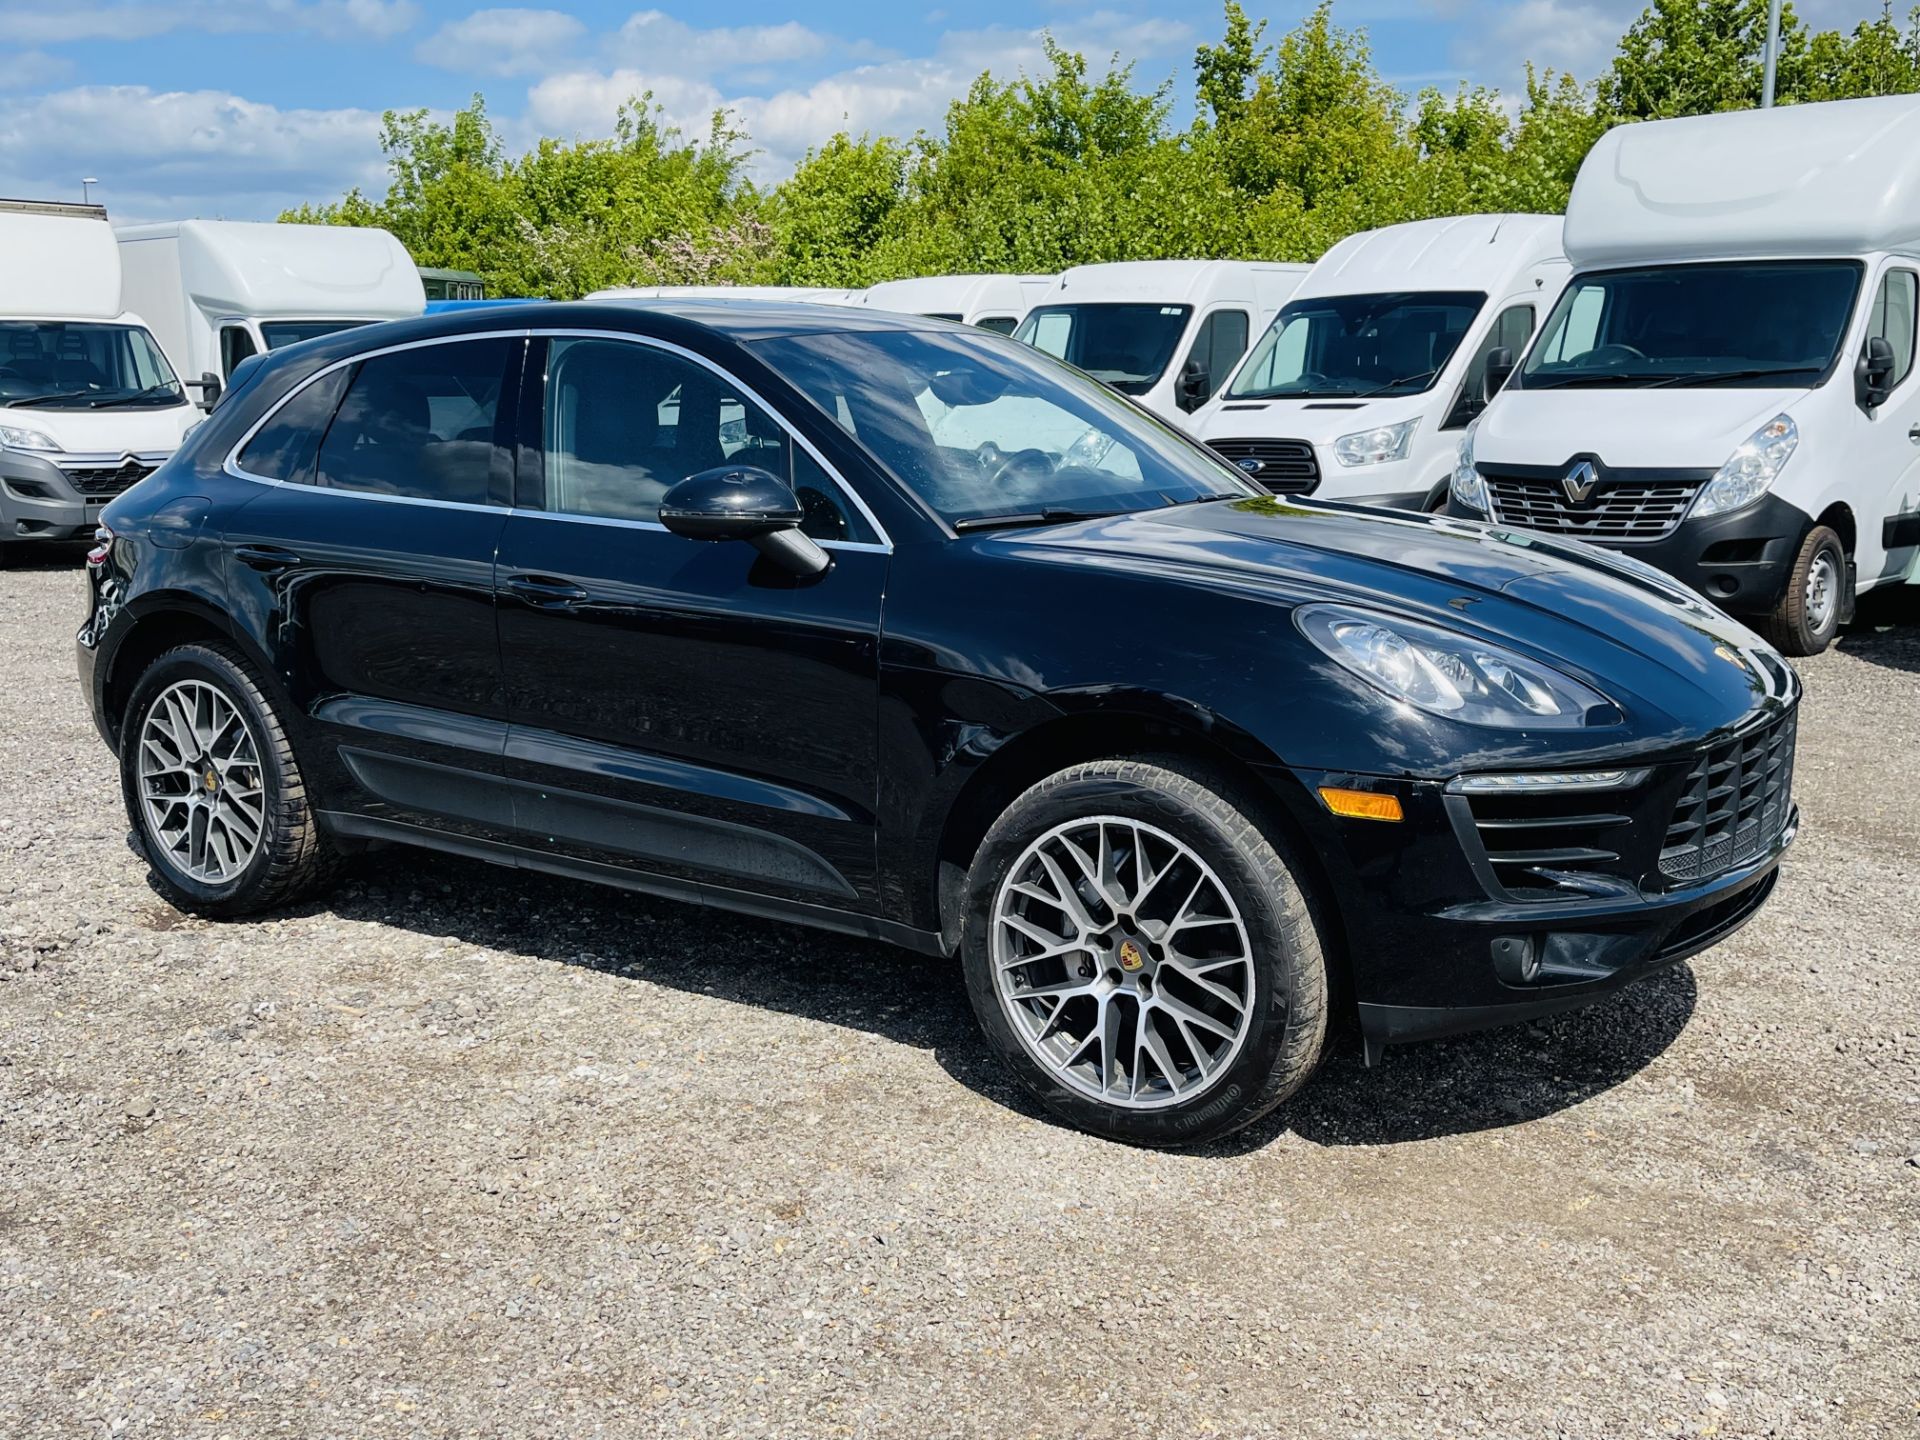 ** ON SALE ** Porsche Macan S 3.0L V6 AWD ' 2015 Year ' Sat Nav - Panoramic Roof - ULEZ Compliant - Image 14 of 44